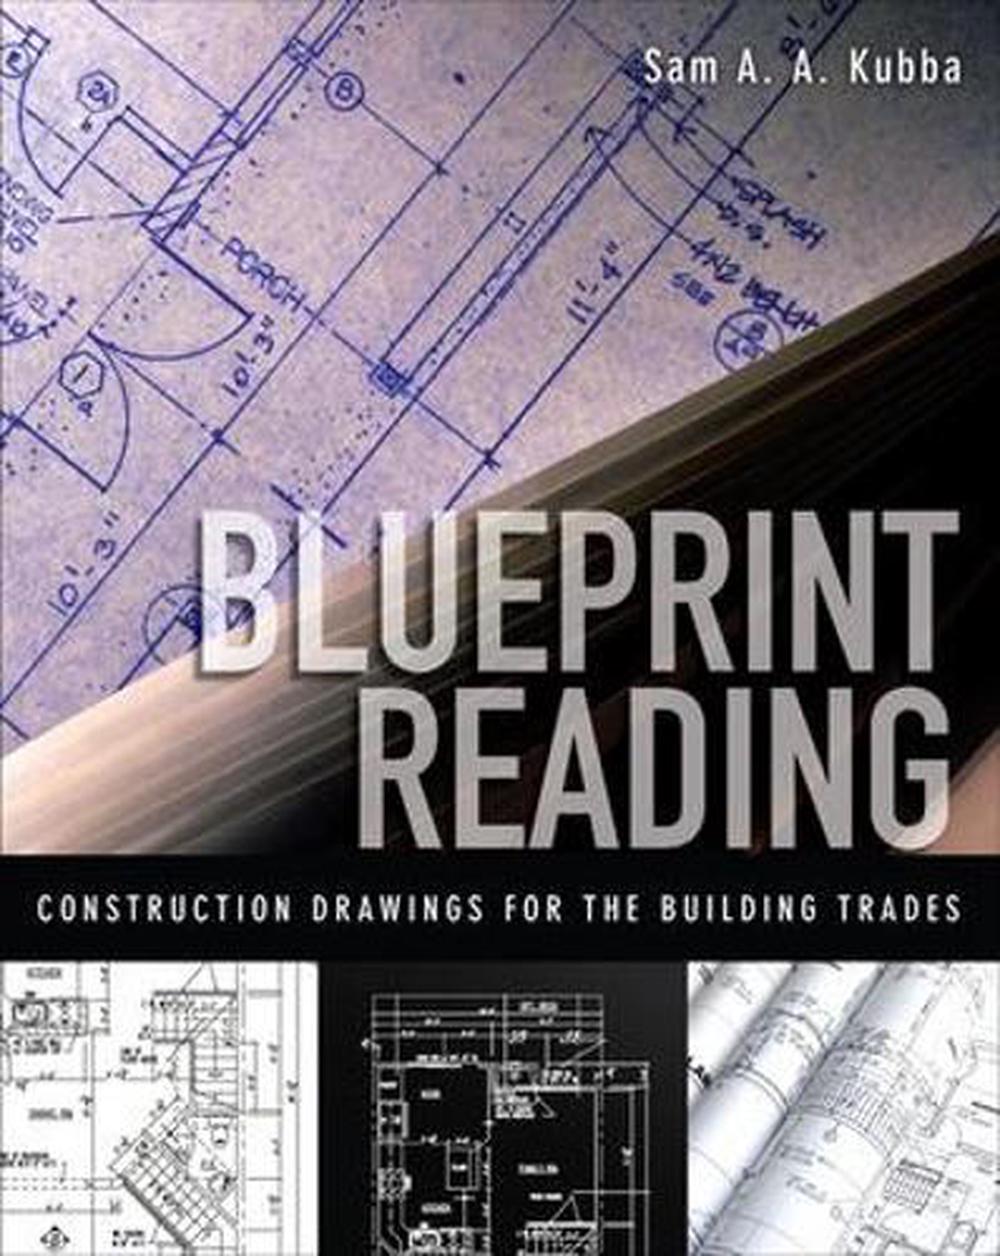 Blueprint Reading Construction Drawings for the Building Trades by Sam